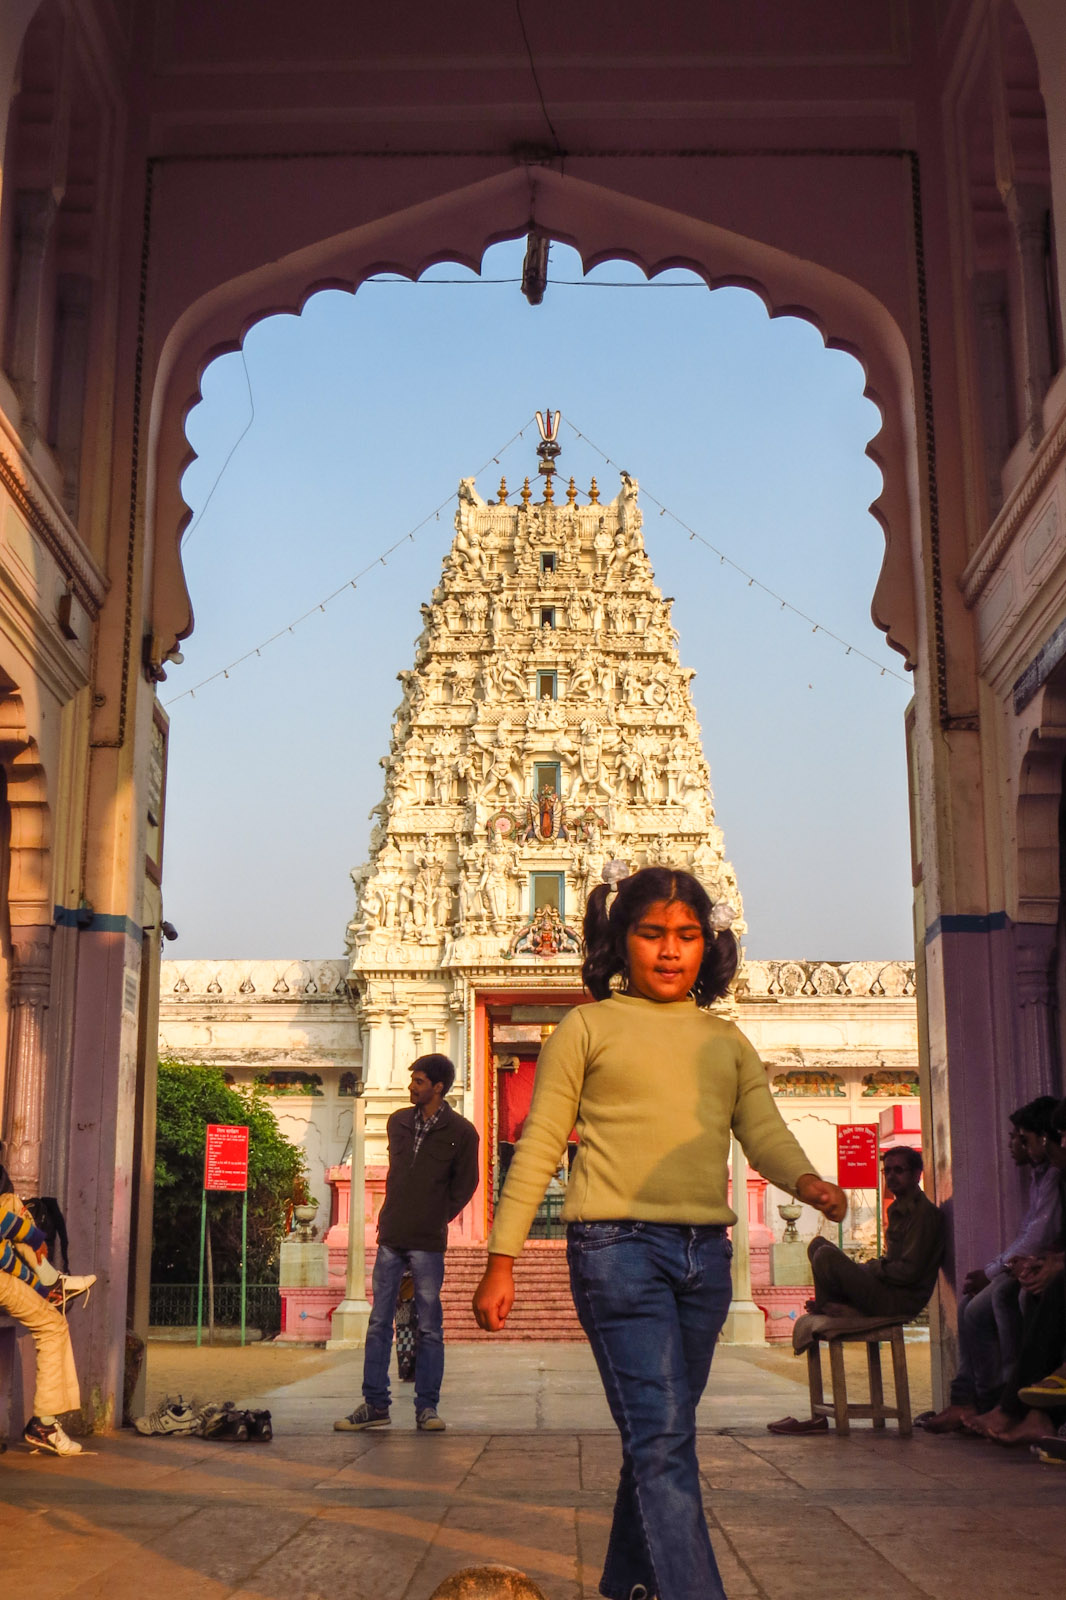 pushkar-temple-and-young-girl